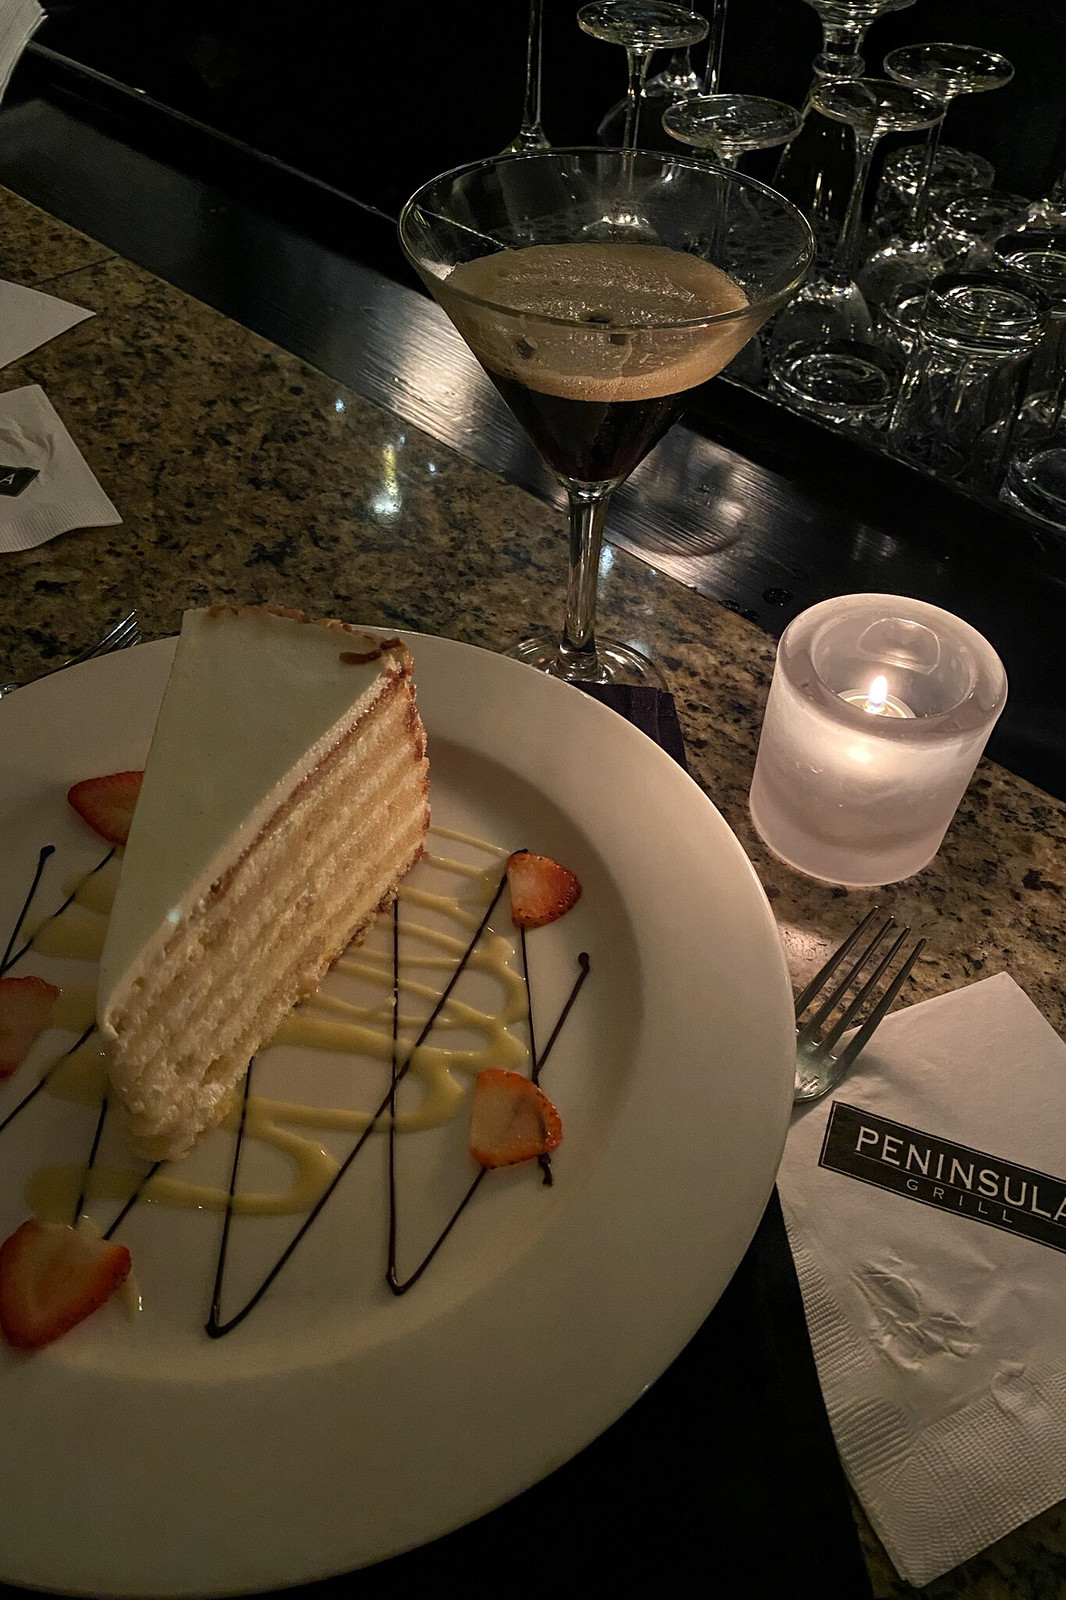 Famous Coconut Cake at Peninsula Grill | Where to Eat in Charleston | Best Restaurants in Charleston | First Timer's Guide to 3 Days in Charleston South Carolina | What to do in Charleston | Charleston Travel Guide